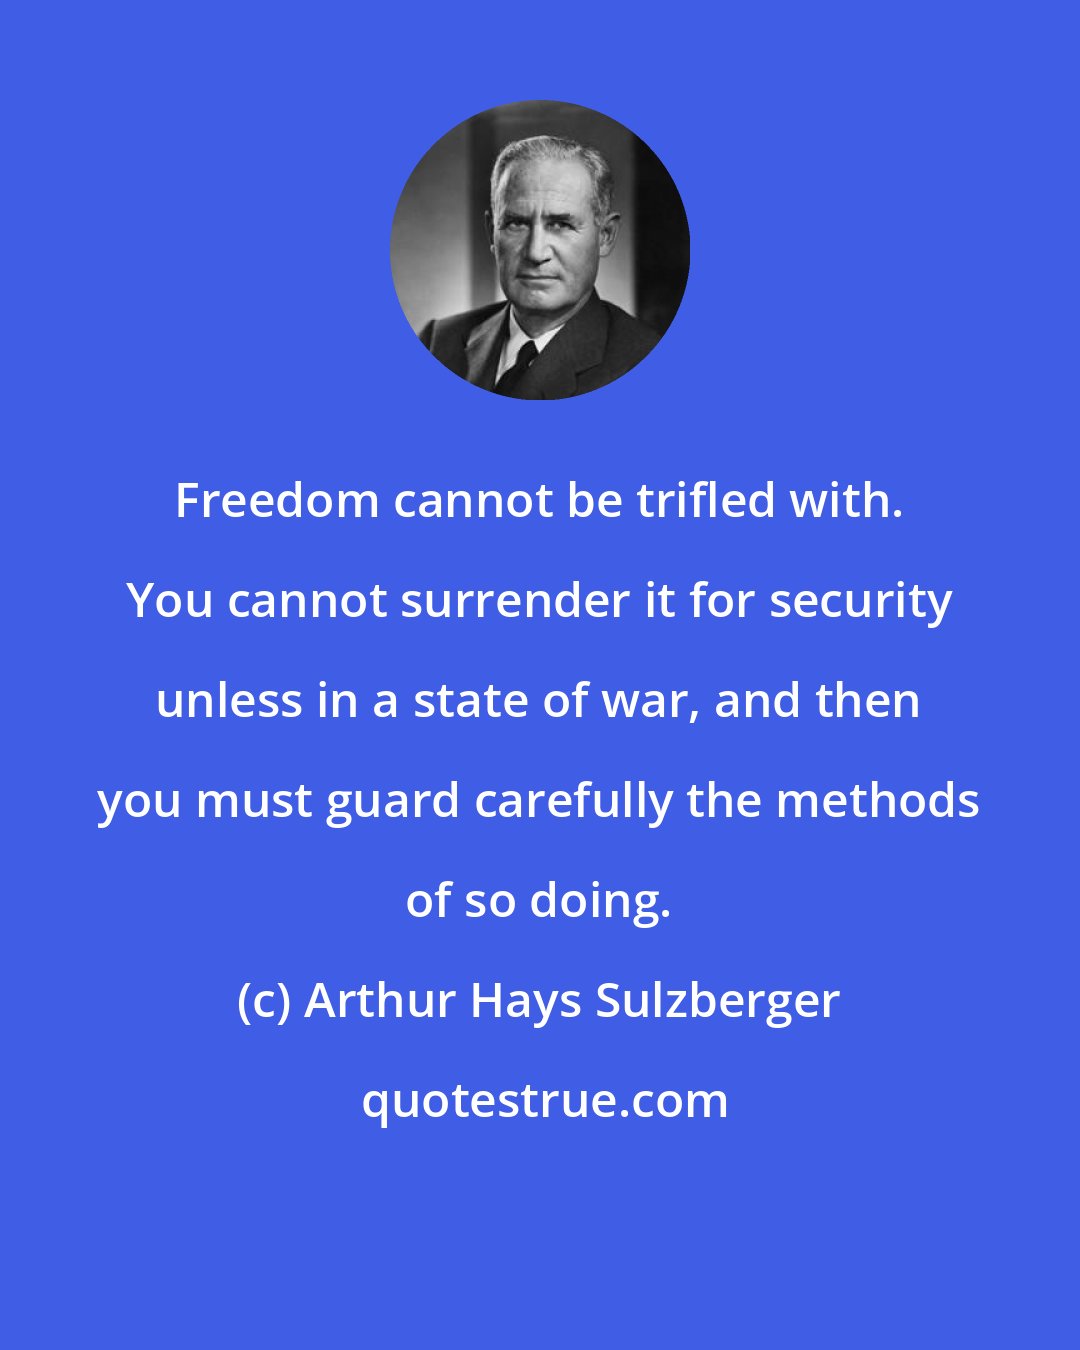 Arthur Hays Sulzberger: Freedom cannot be trifled with. You cannot surrender it for security unless in a state of war, and then you must guard carefully the methods of so doing.